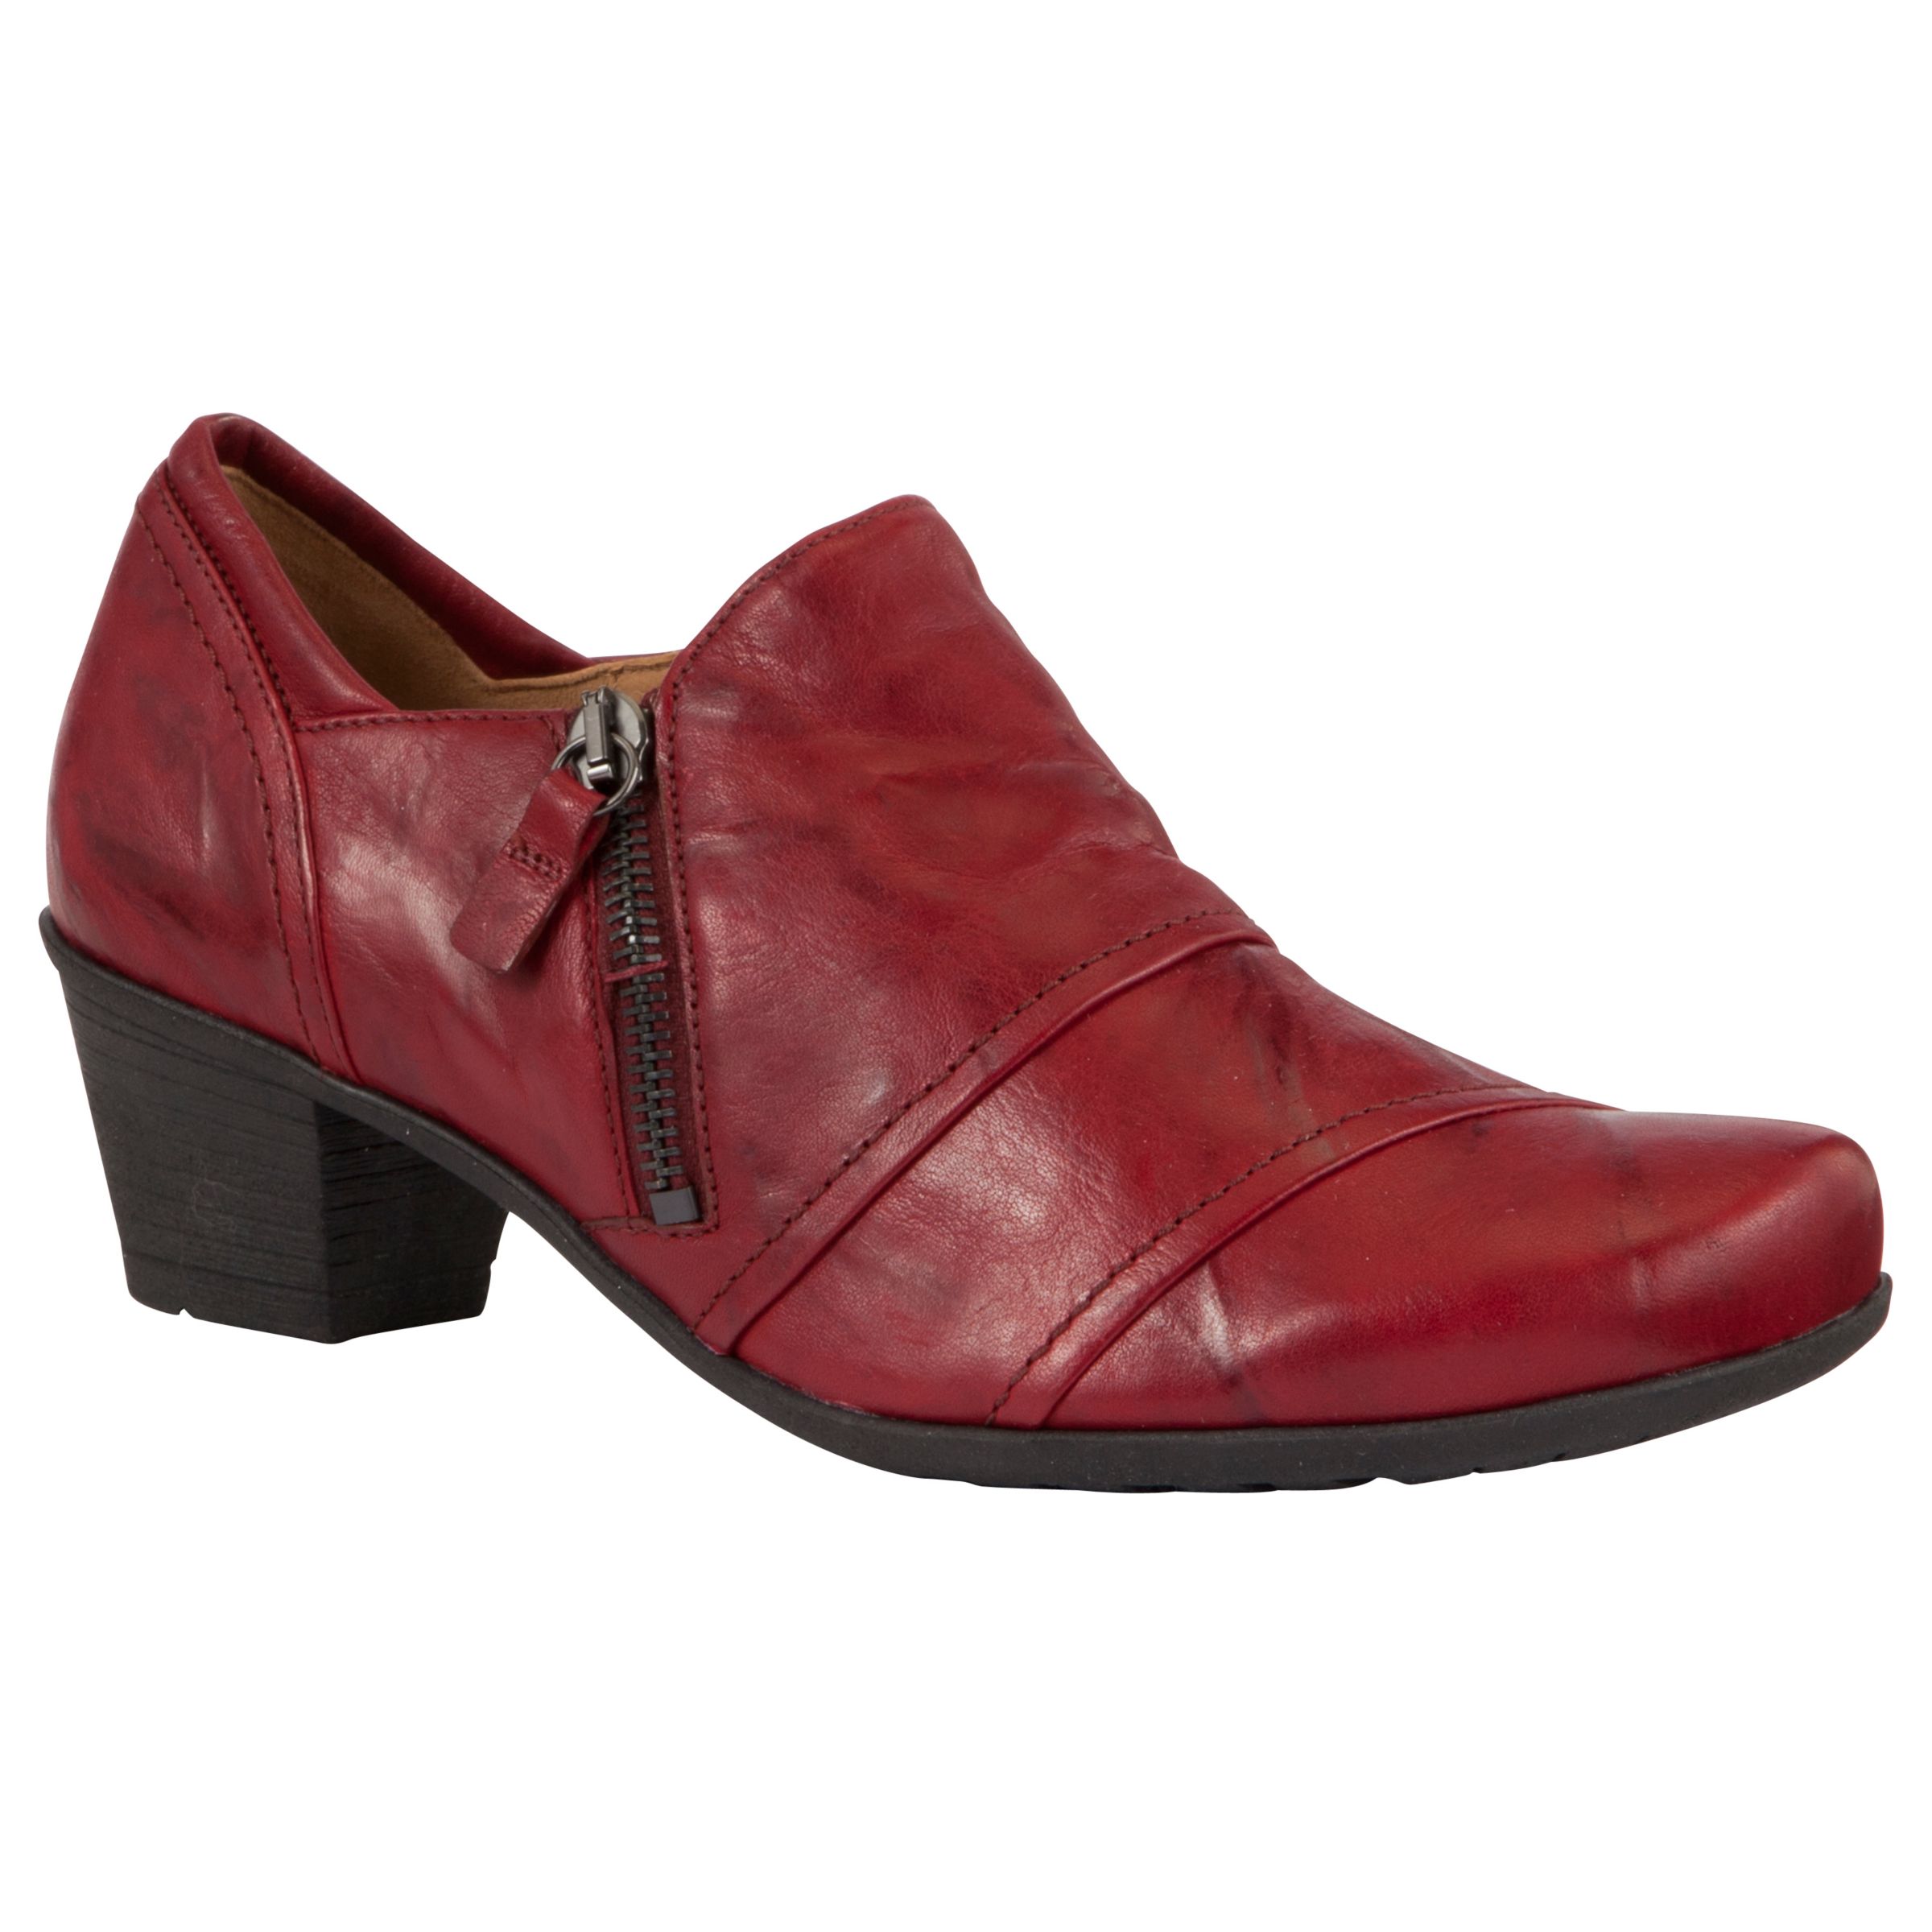 gabor red shoes women's